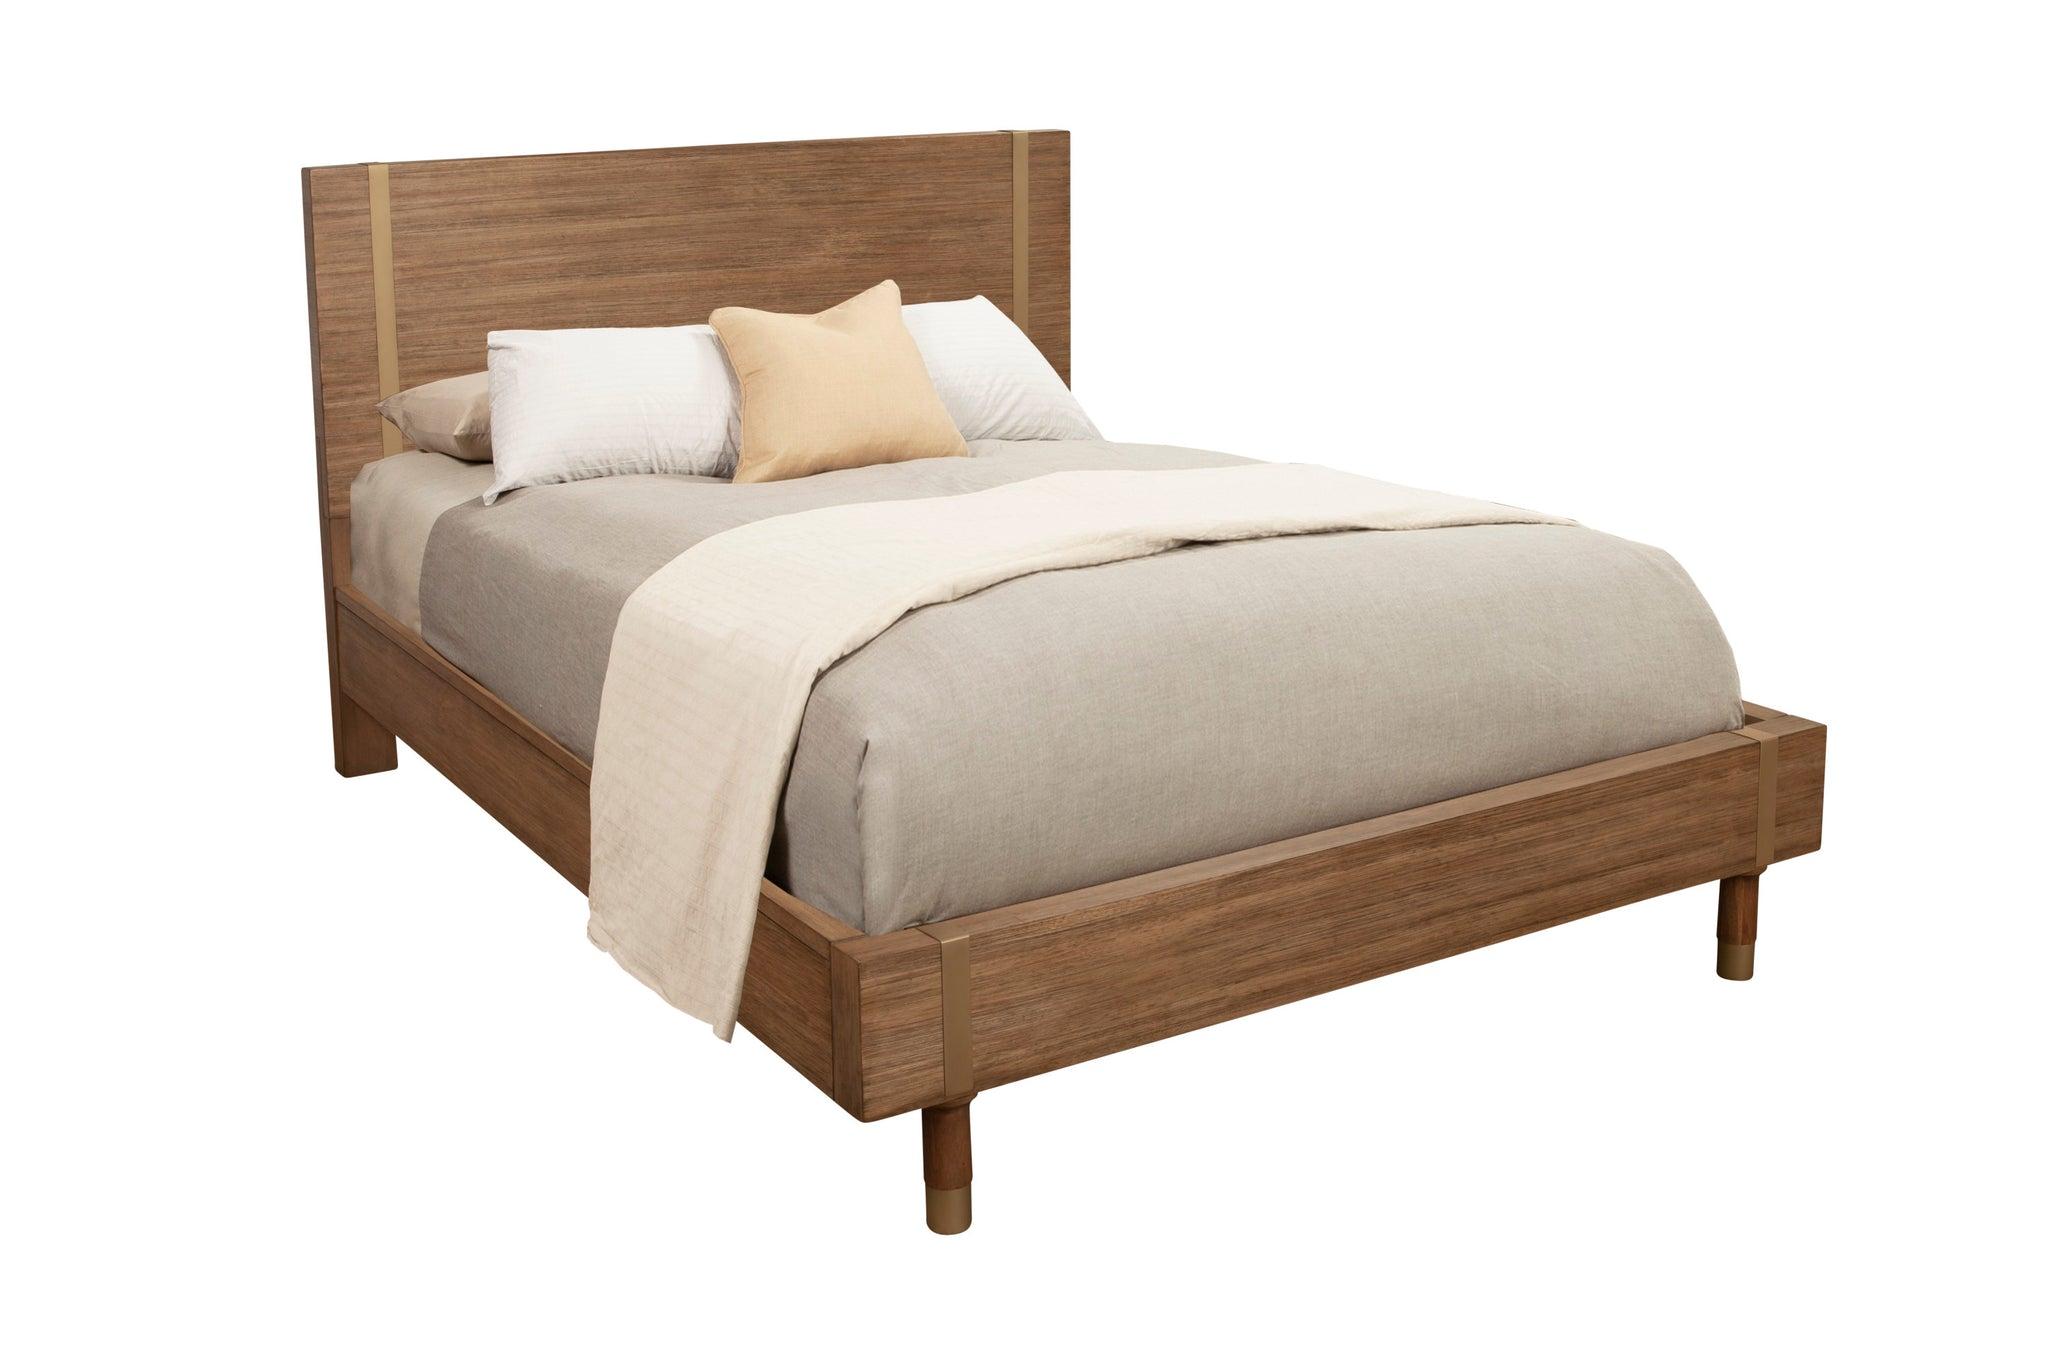 Contemporary, Modern Platform Bed EASTON 2088-08F in Sand 